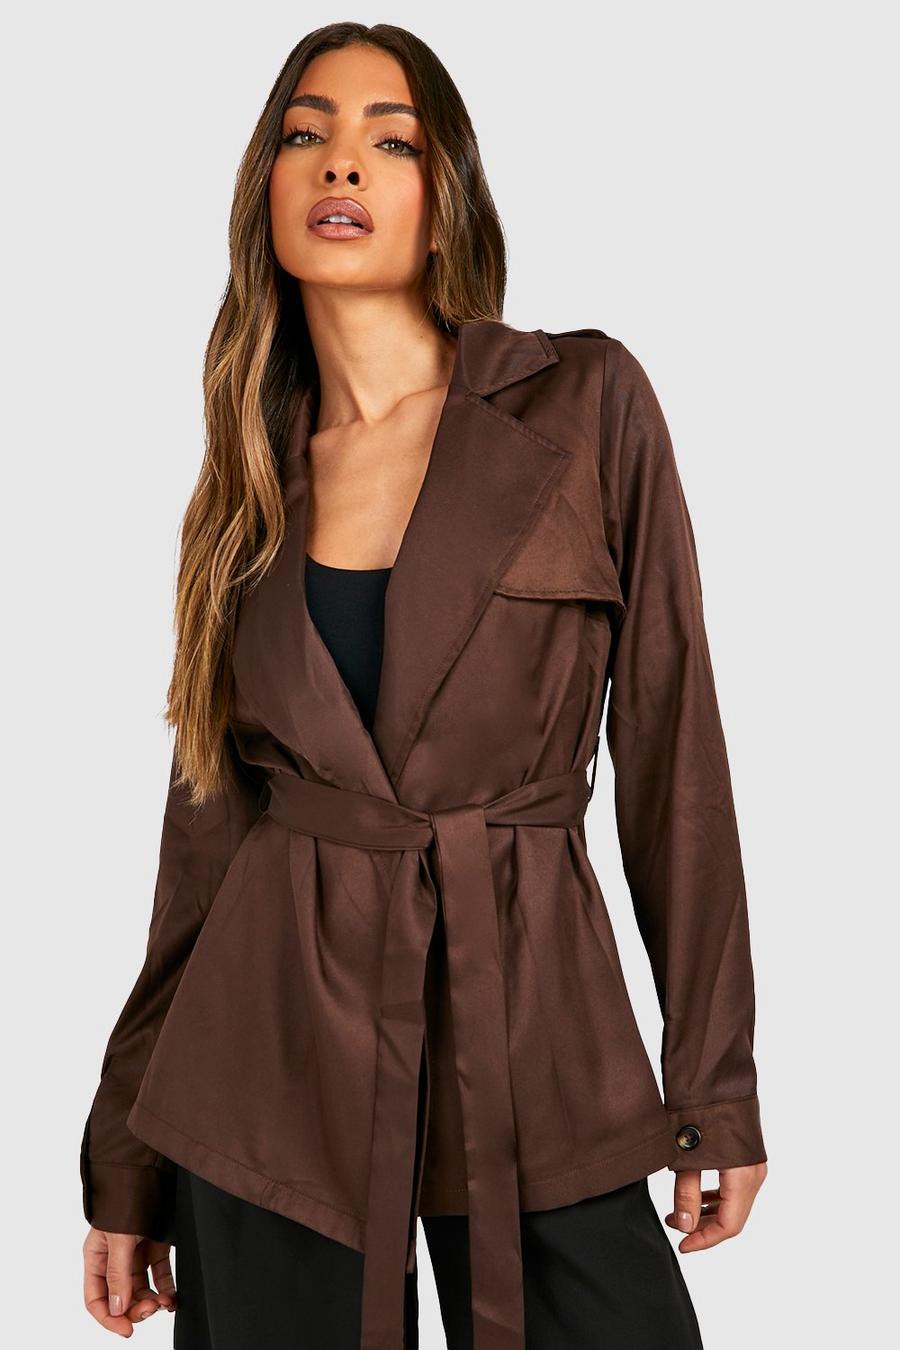 Chocolate brun Short Belted Trench Coat